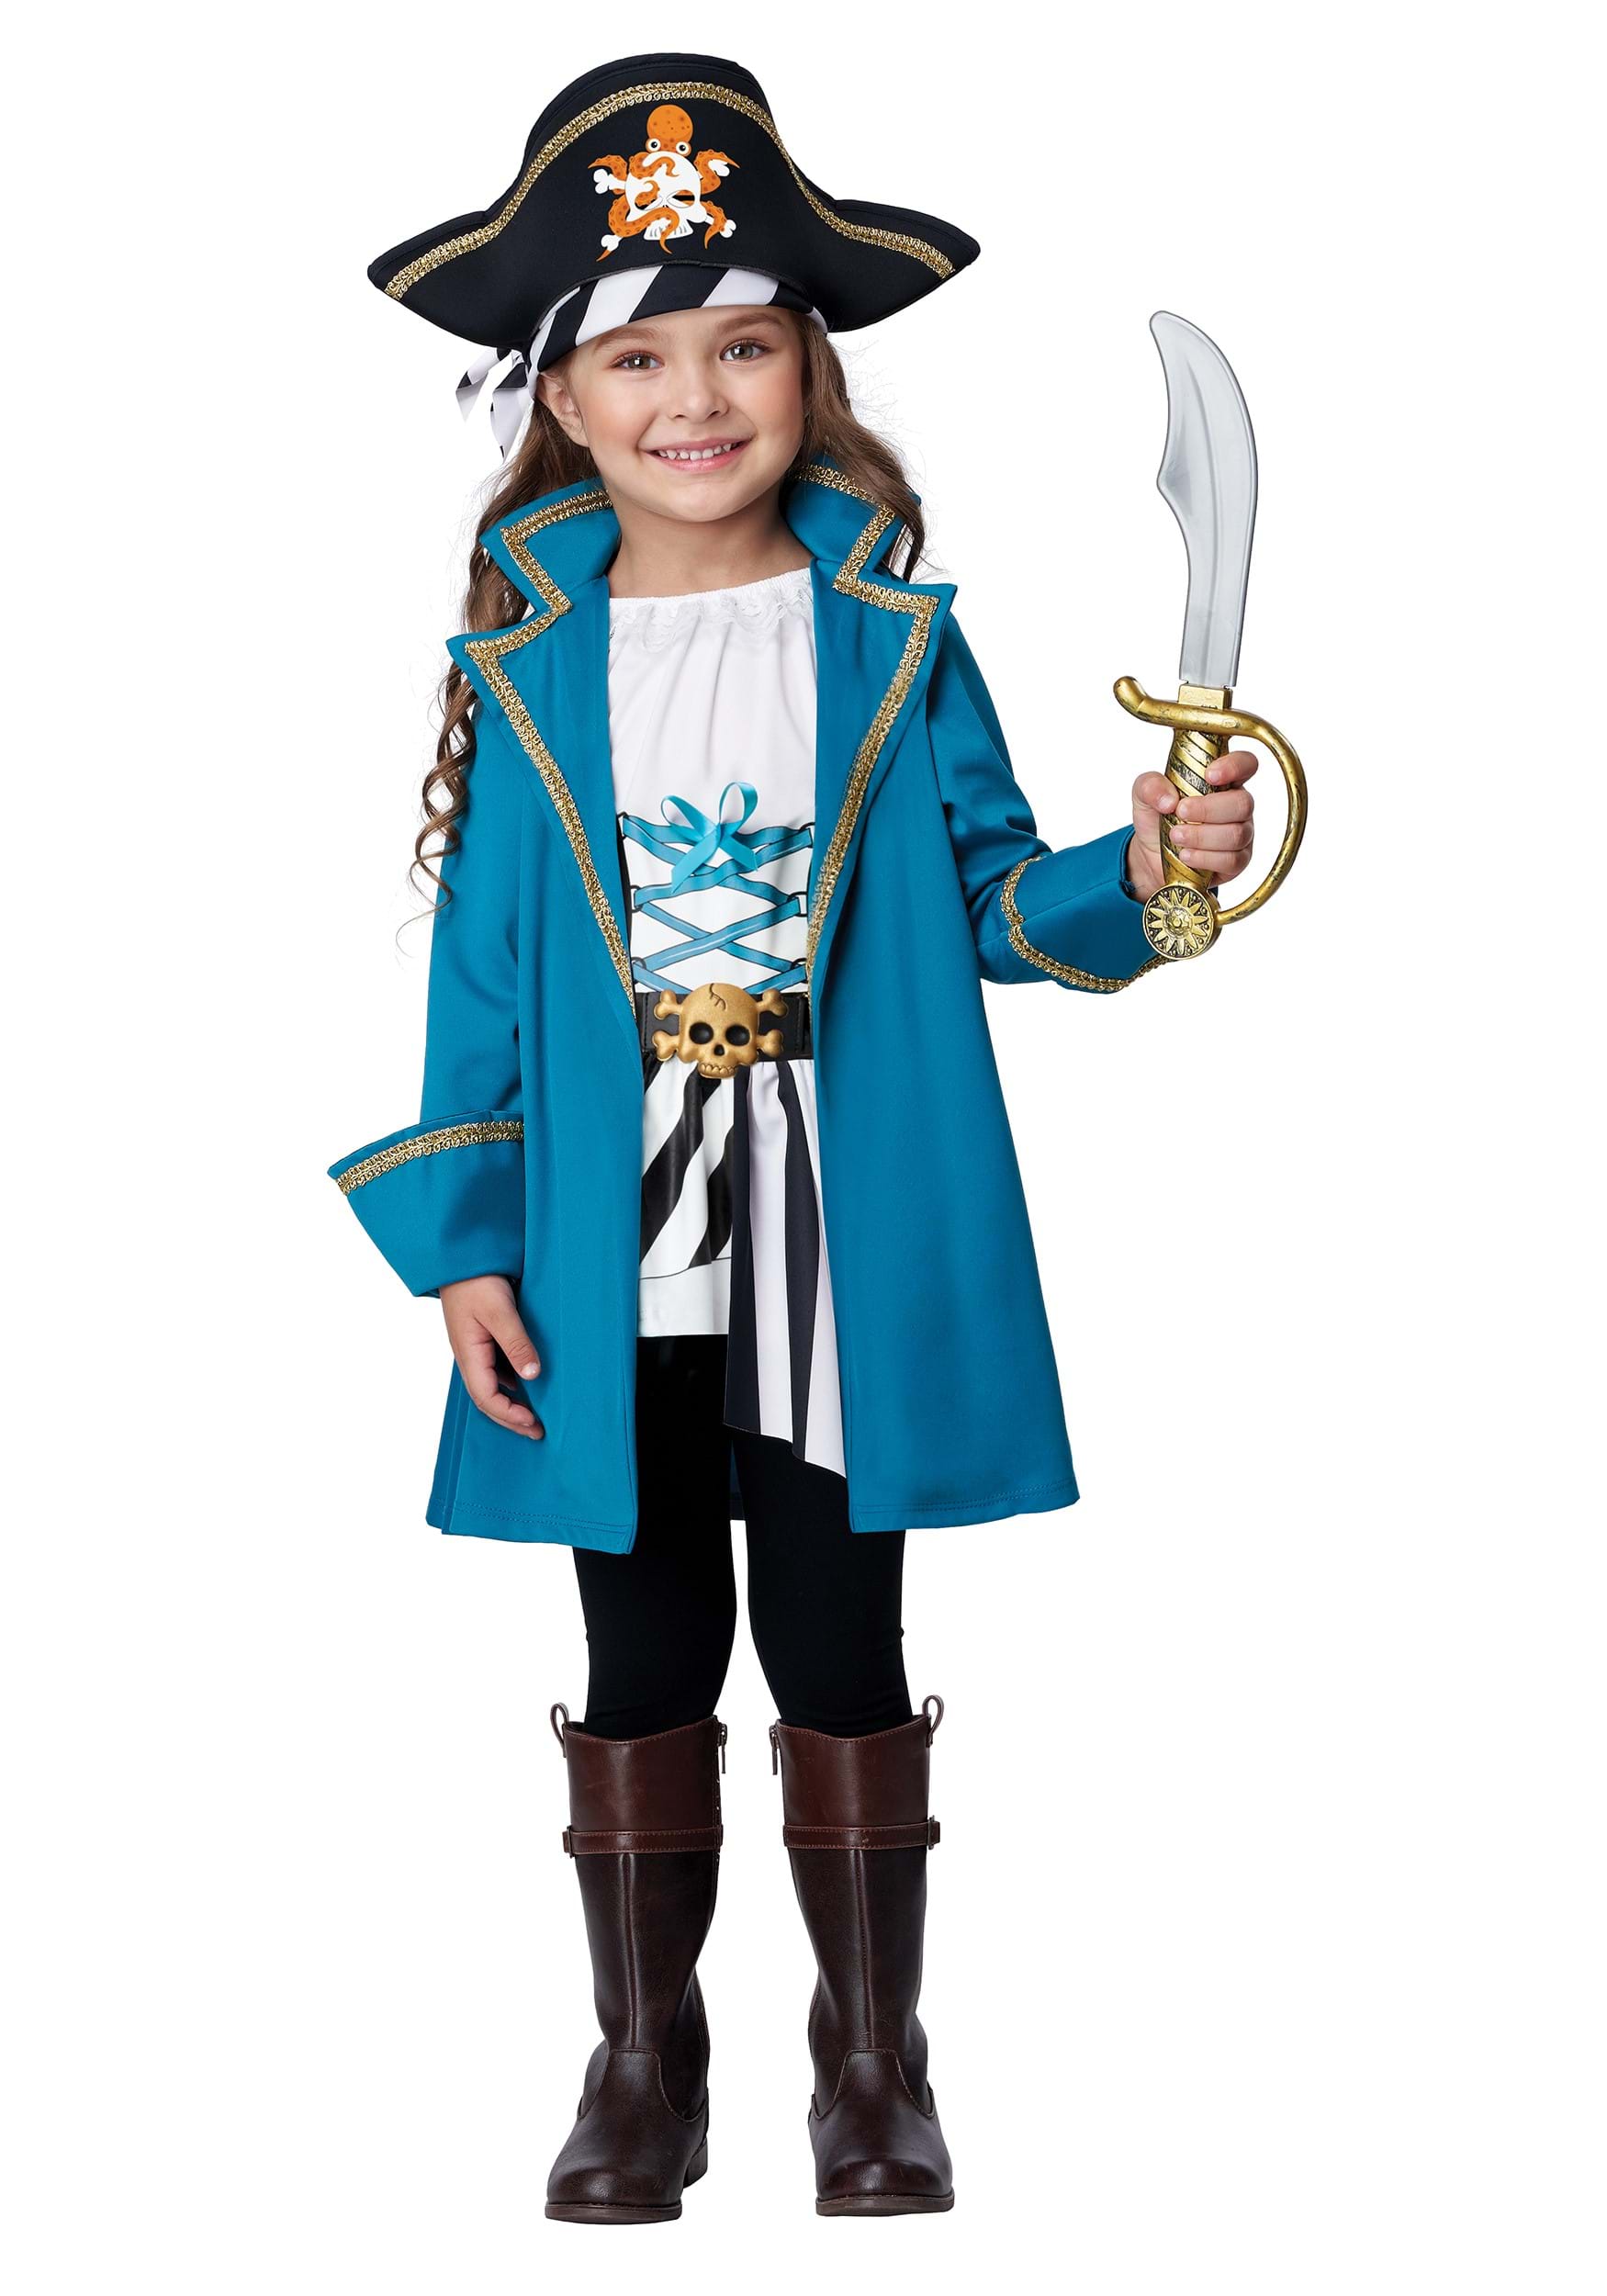 Photos - Fancy Dress California Costume Collection Petite Pirate Toddler Costume Black/Gree 